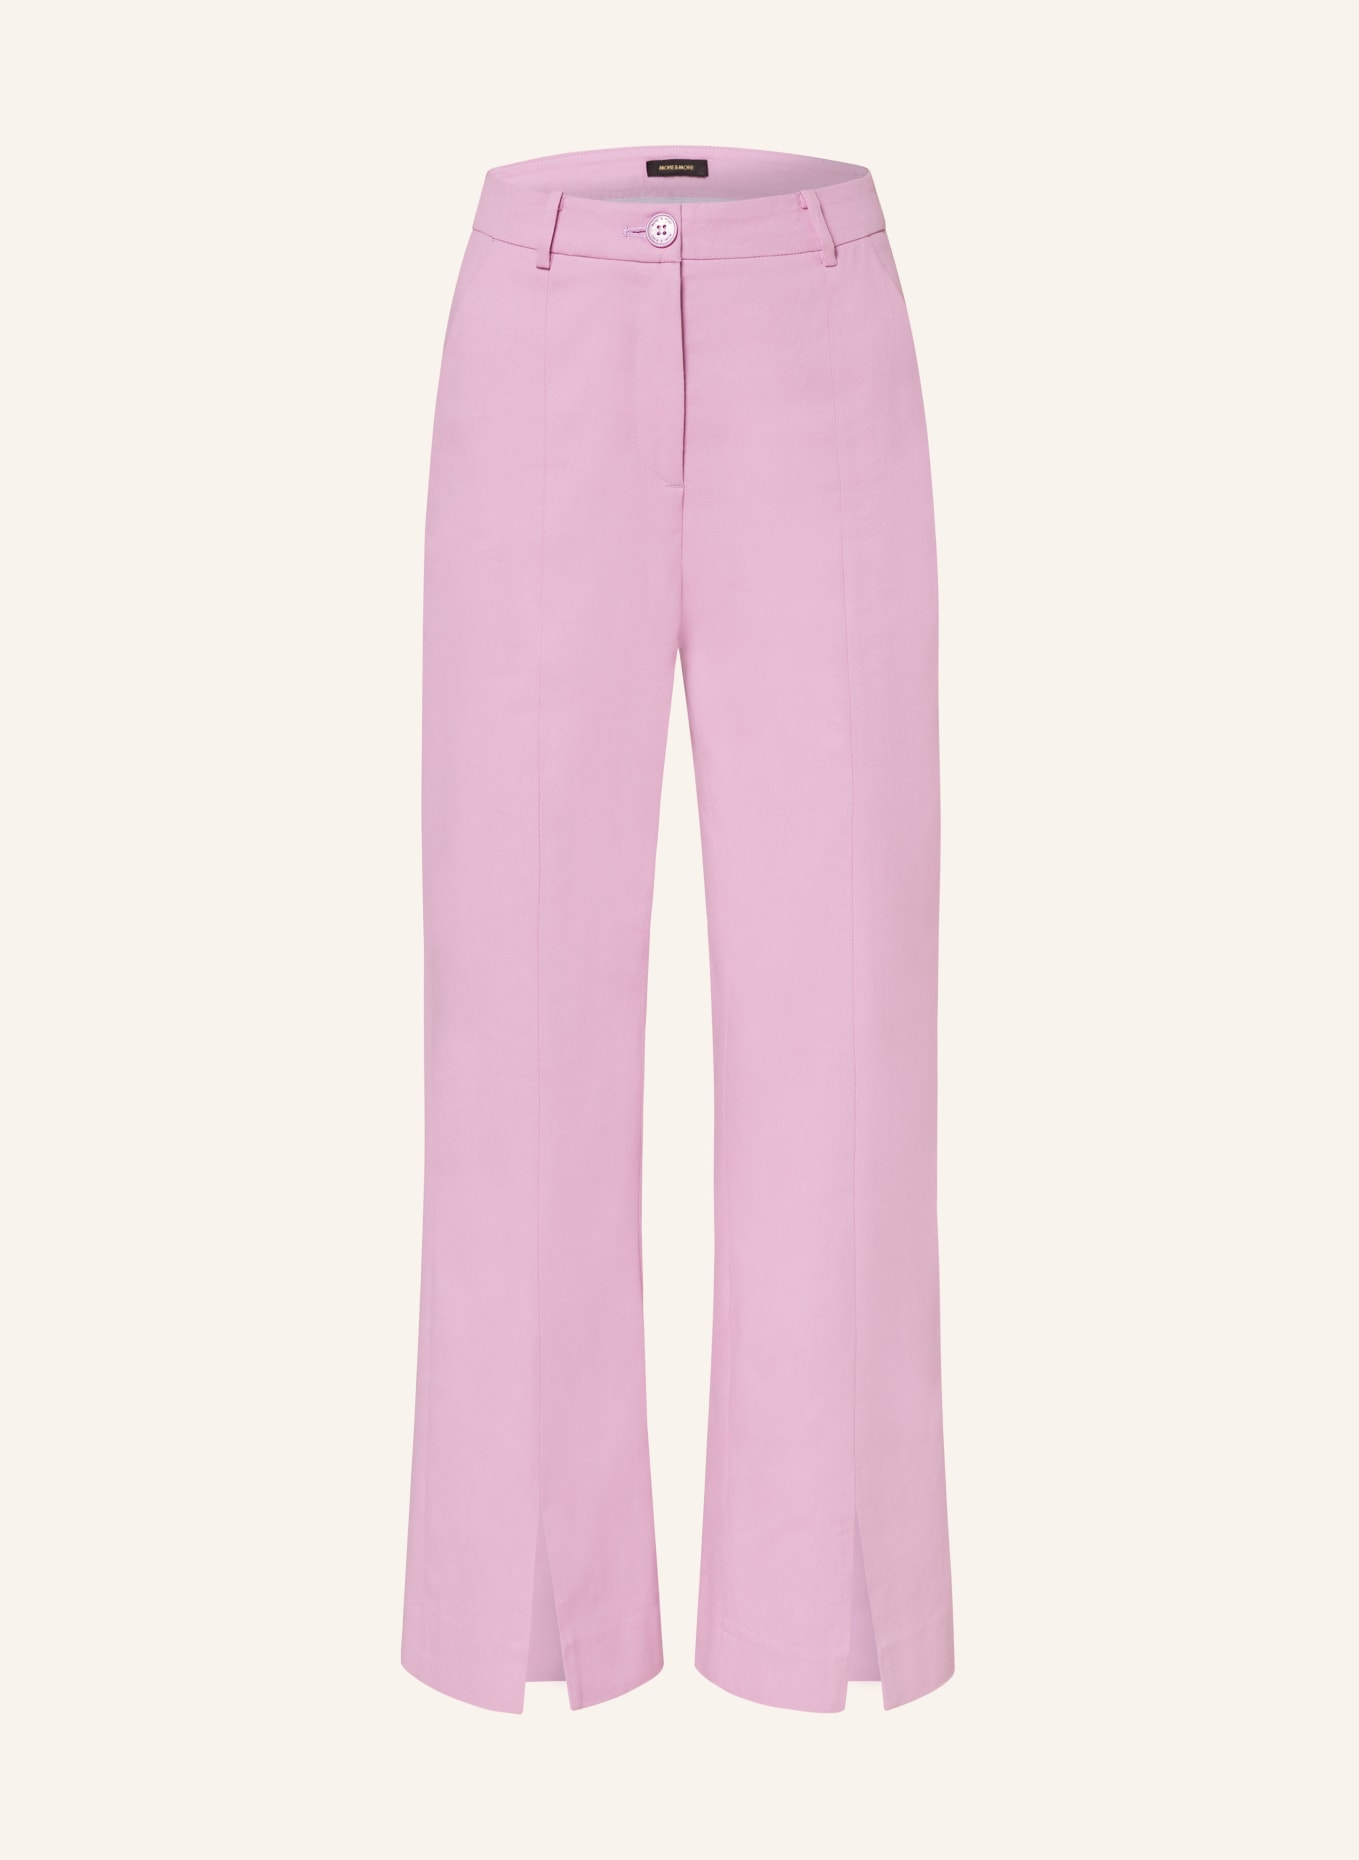 MORE & MORE 7/8 pants, Color: PINK (Image 1)